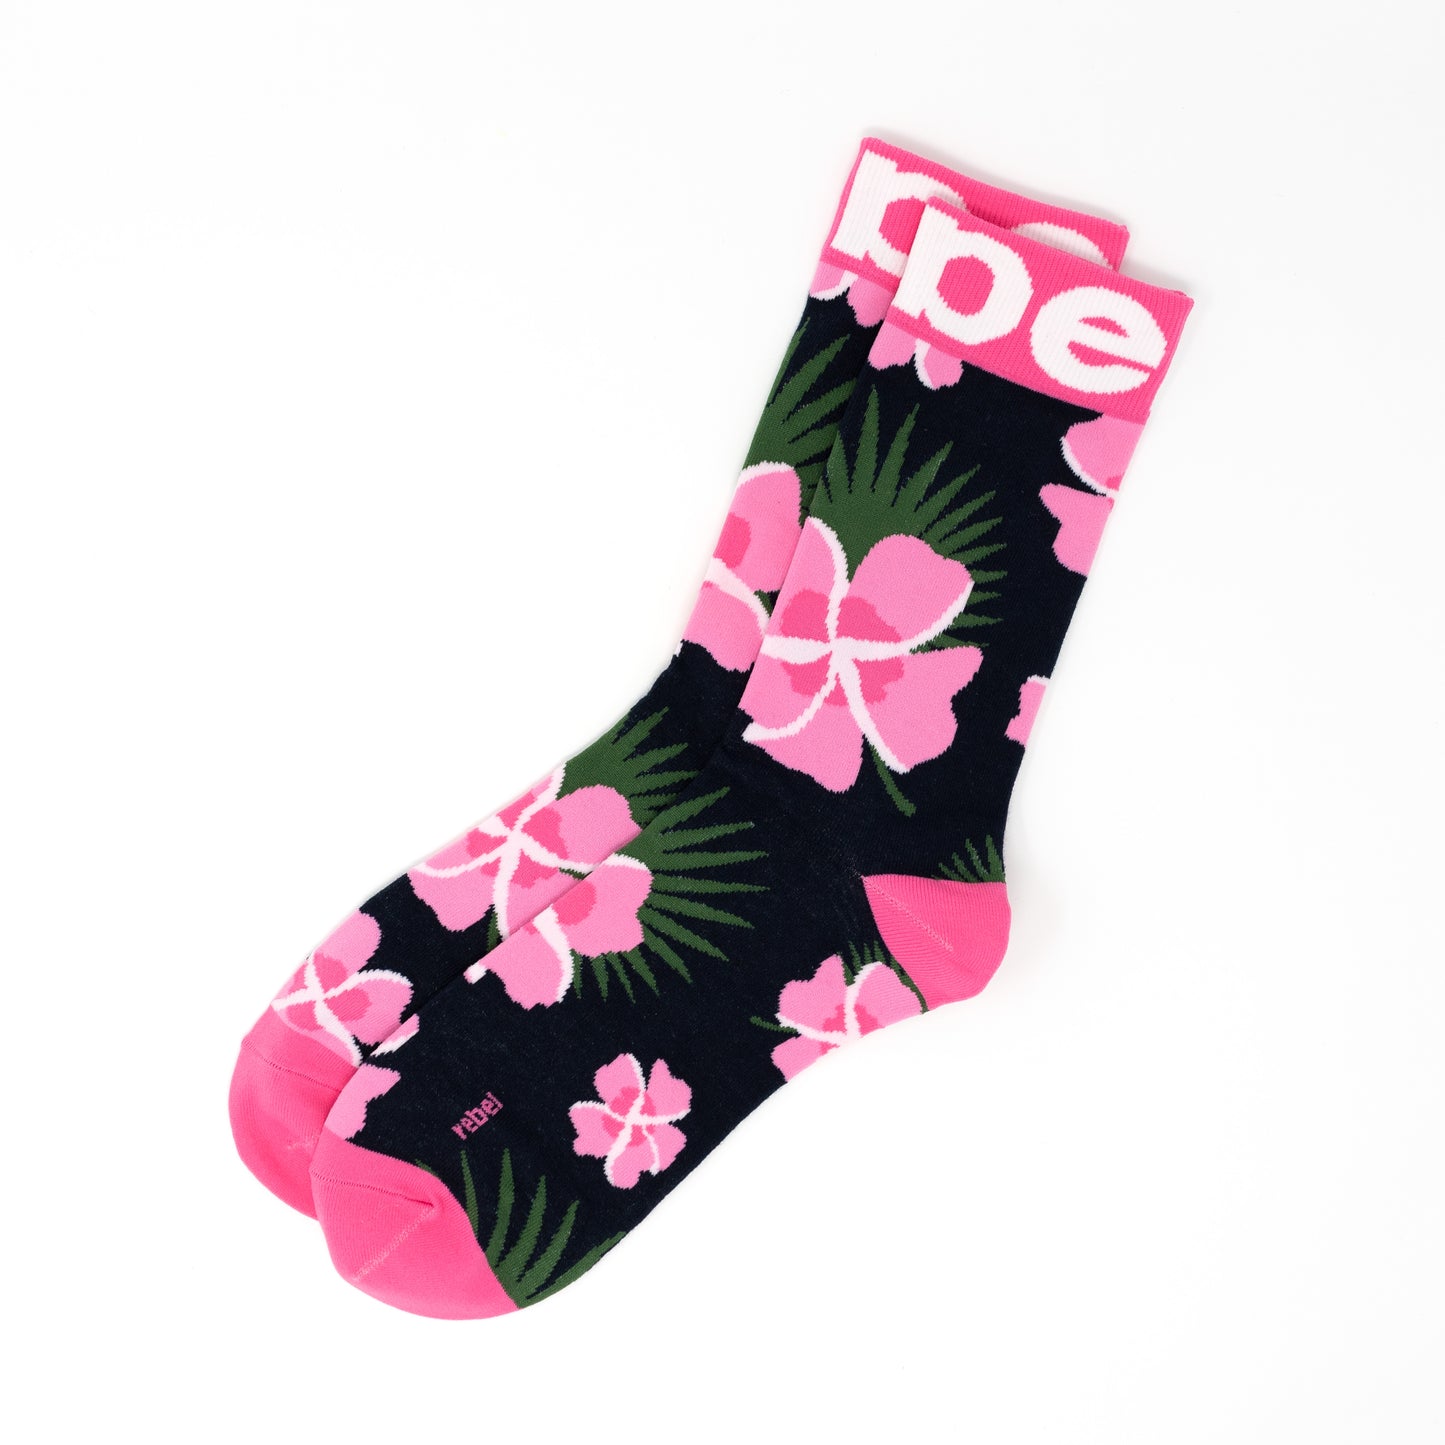 Our Tropical Flower Socks are the perfect addition to any wardrobe, whether you're dressing up or dressing down.